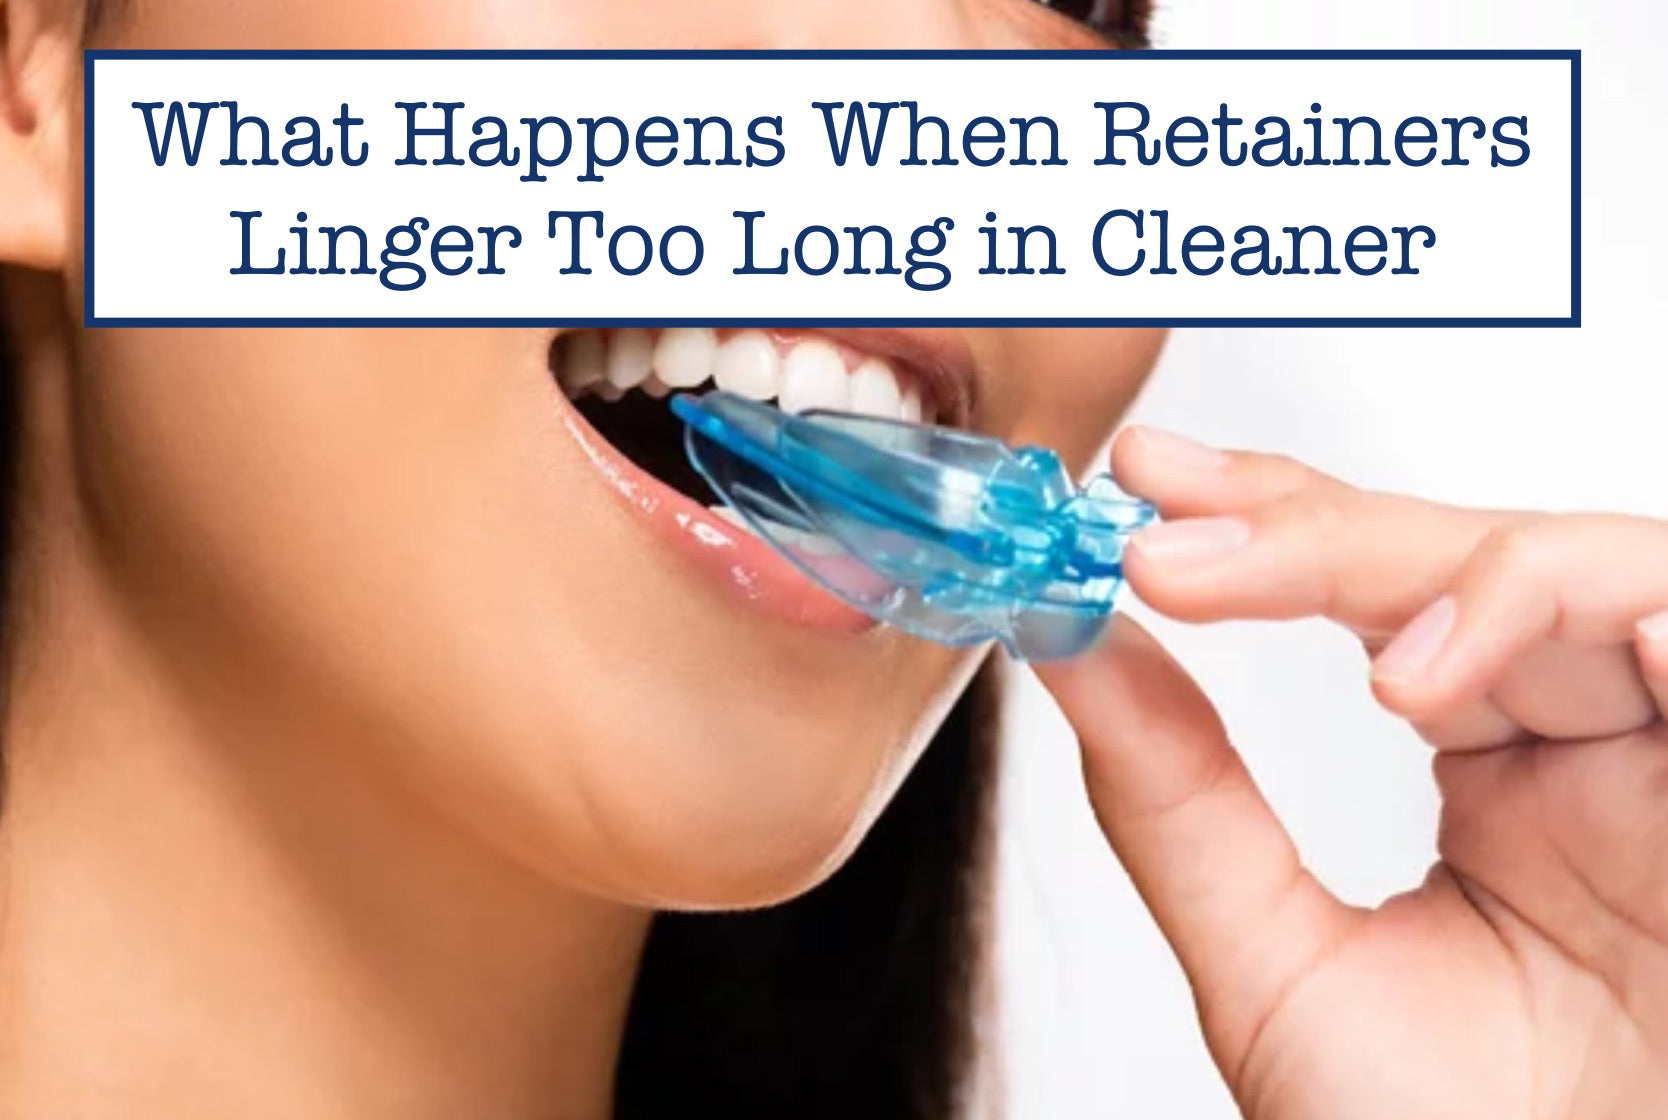 What Happens When Retainers Linger Too Long in Cleaner